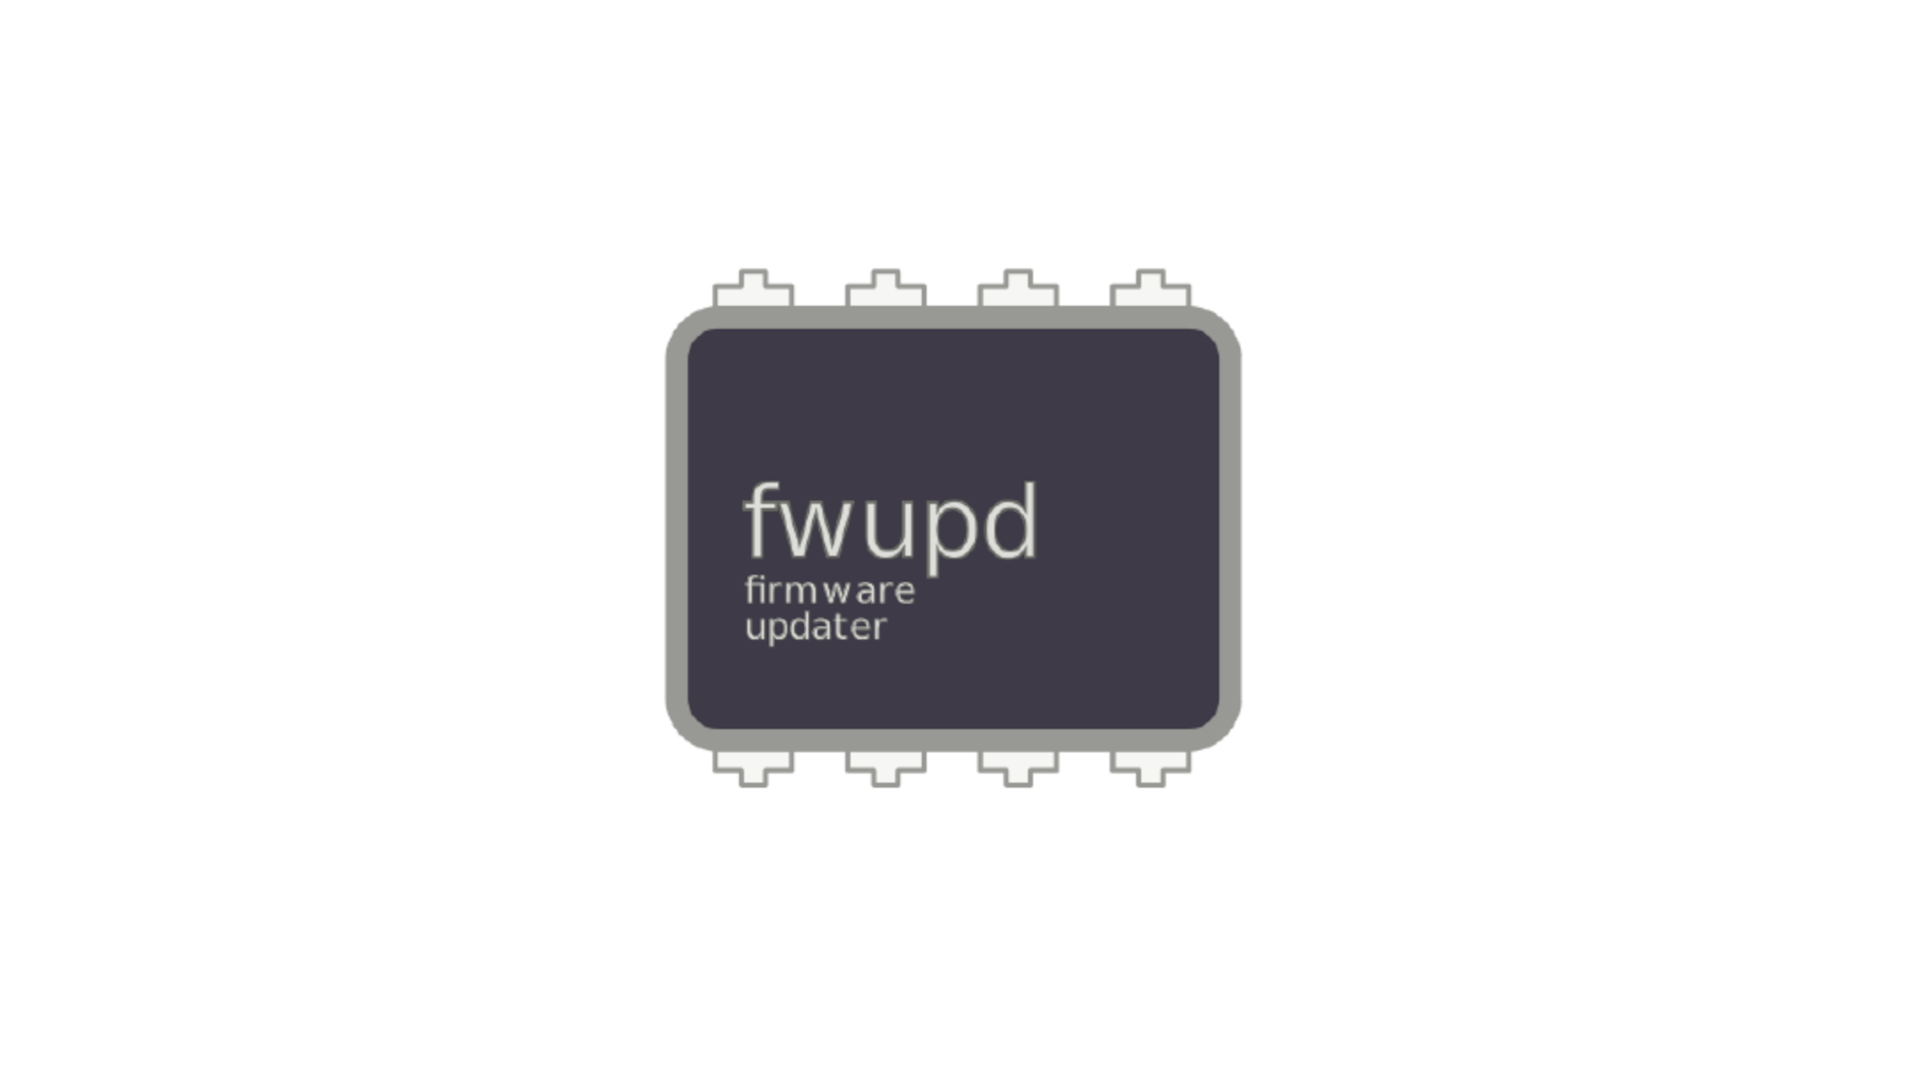 Fwupd 1.5.7 Adds Initial Support for BlueZ Bluetooth Devices, More Improvements